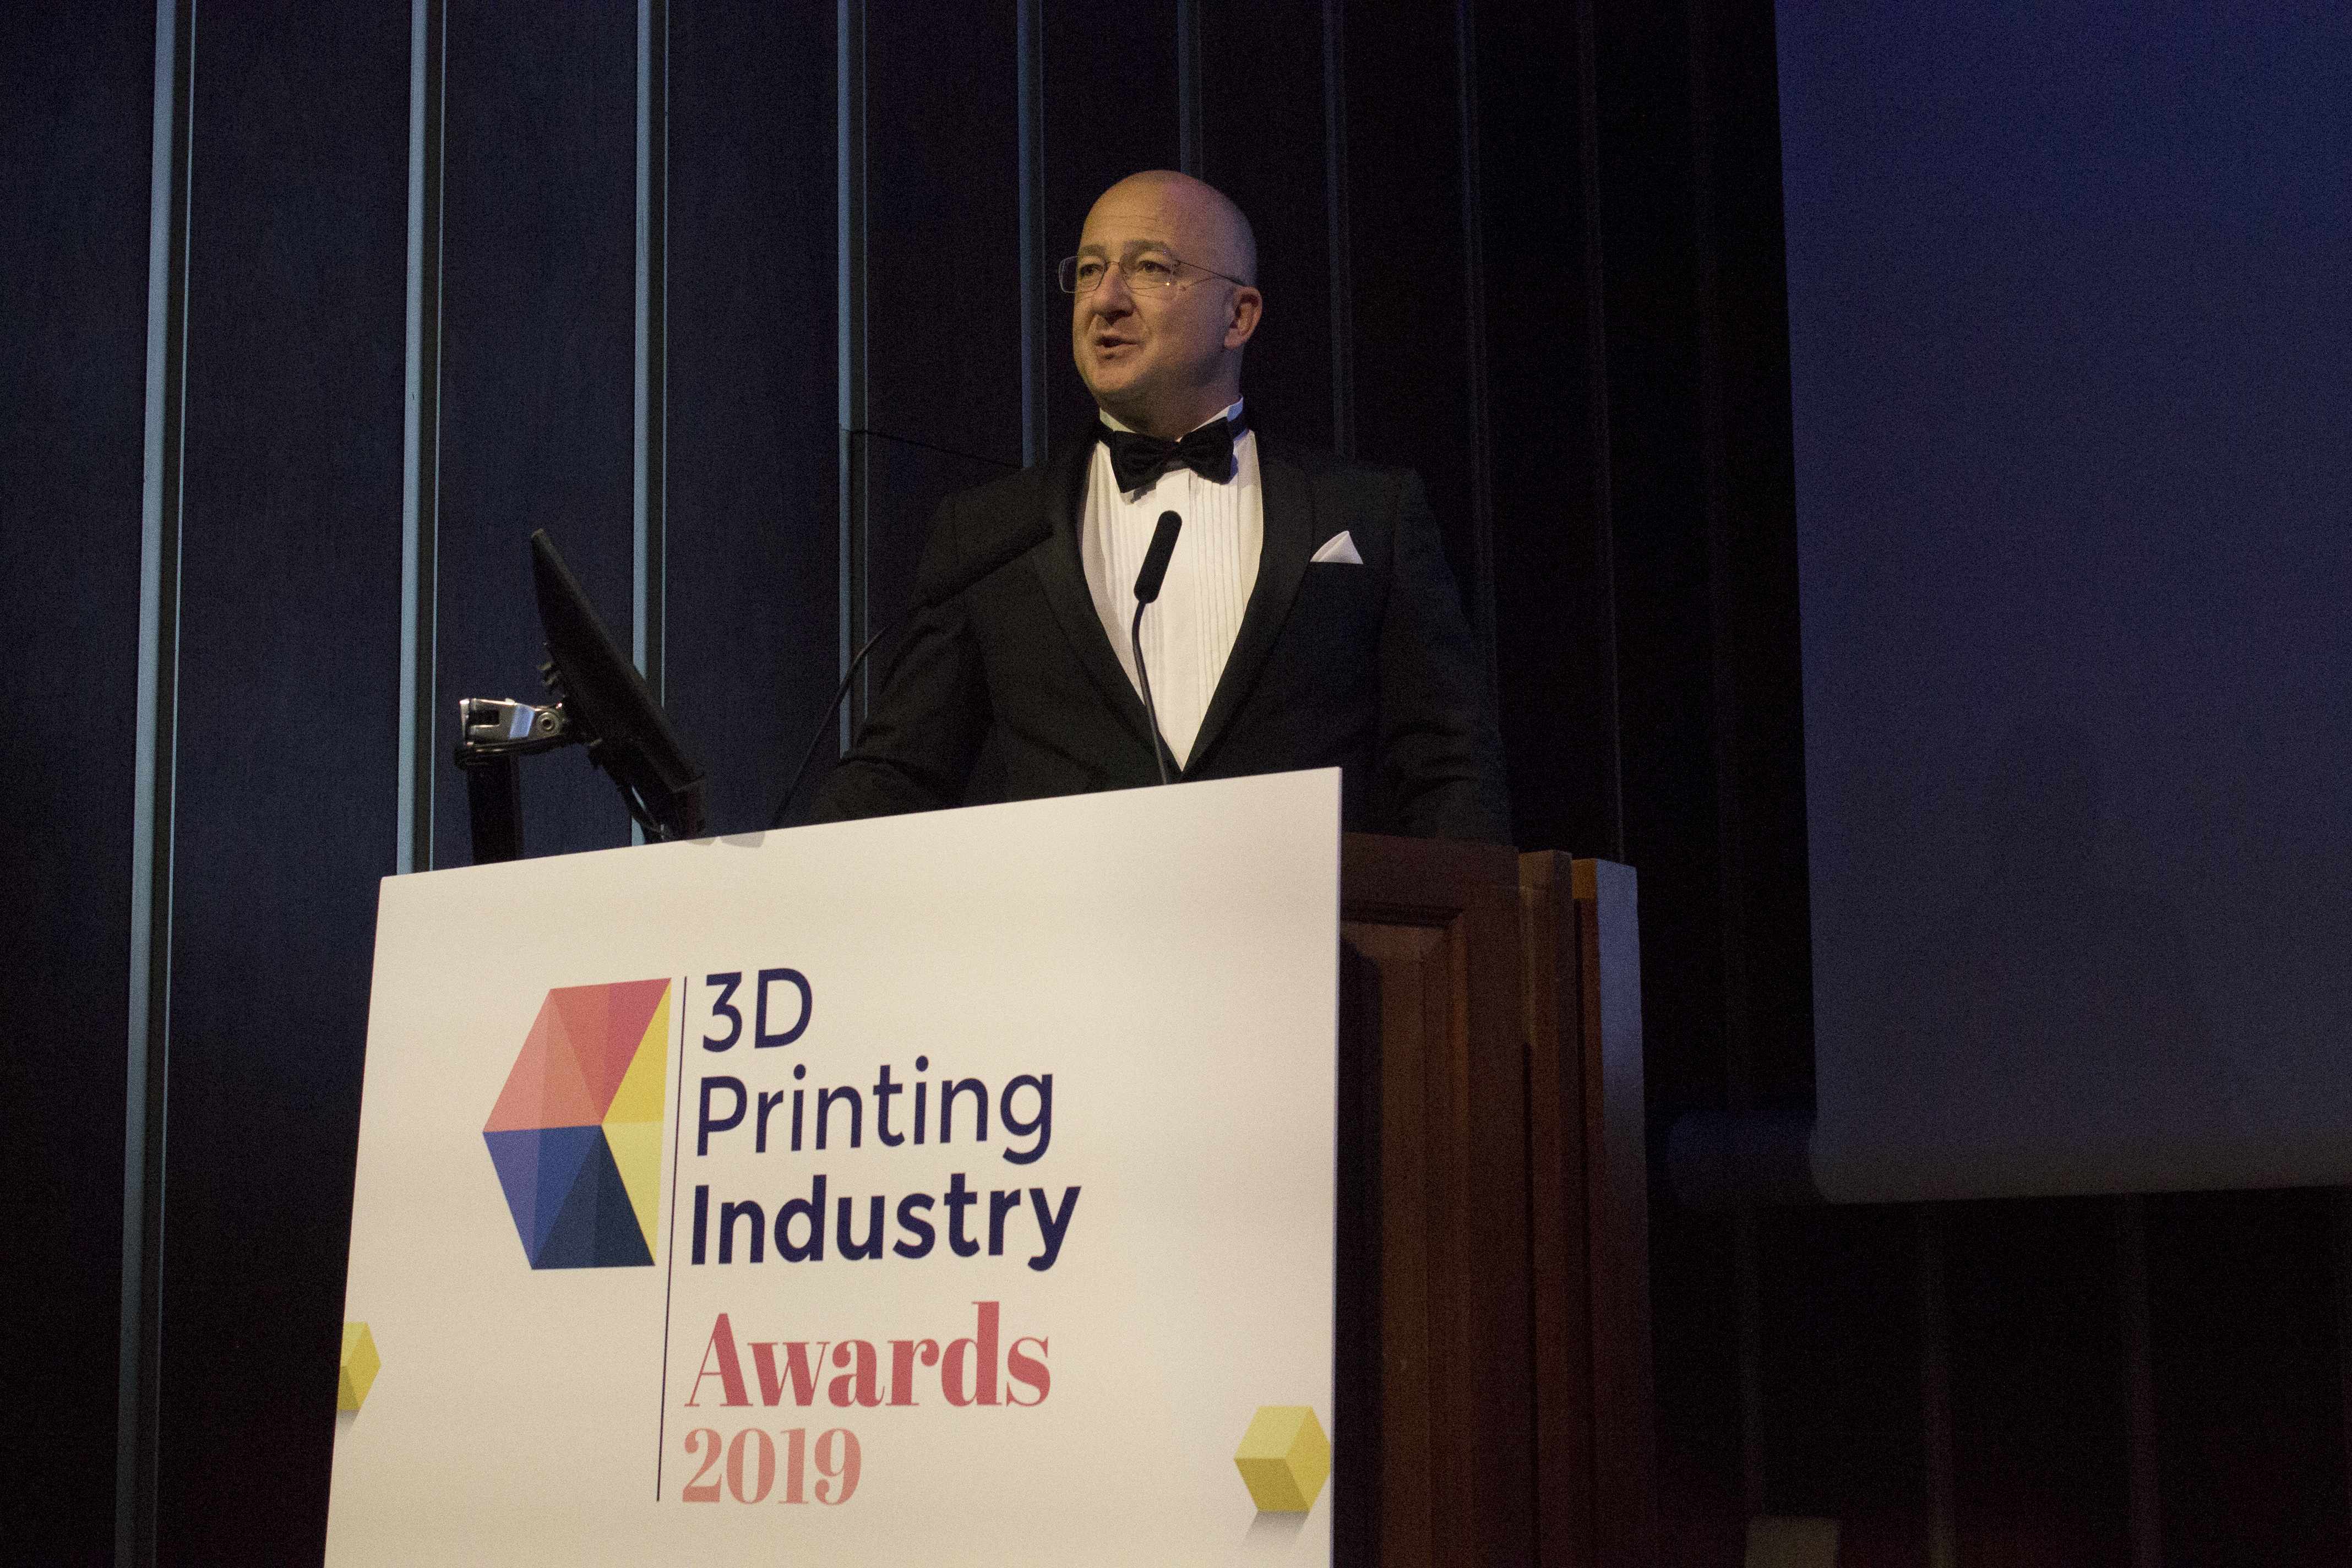 Alexander Sakratidis, Sales & Marketing Manager, Digital Metal AB, accepts the award for 2019 Innovation of the Year. This year, the trophy was awarded for Digital Metal’s precision 3D metal printing technology. Photo by Felix Li for 3D Printing Industry